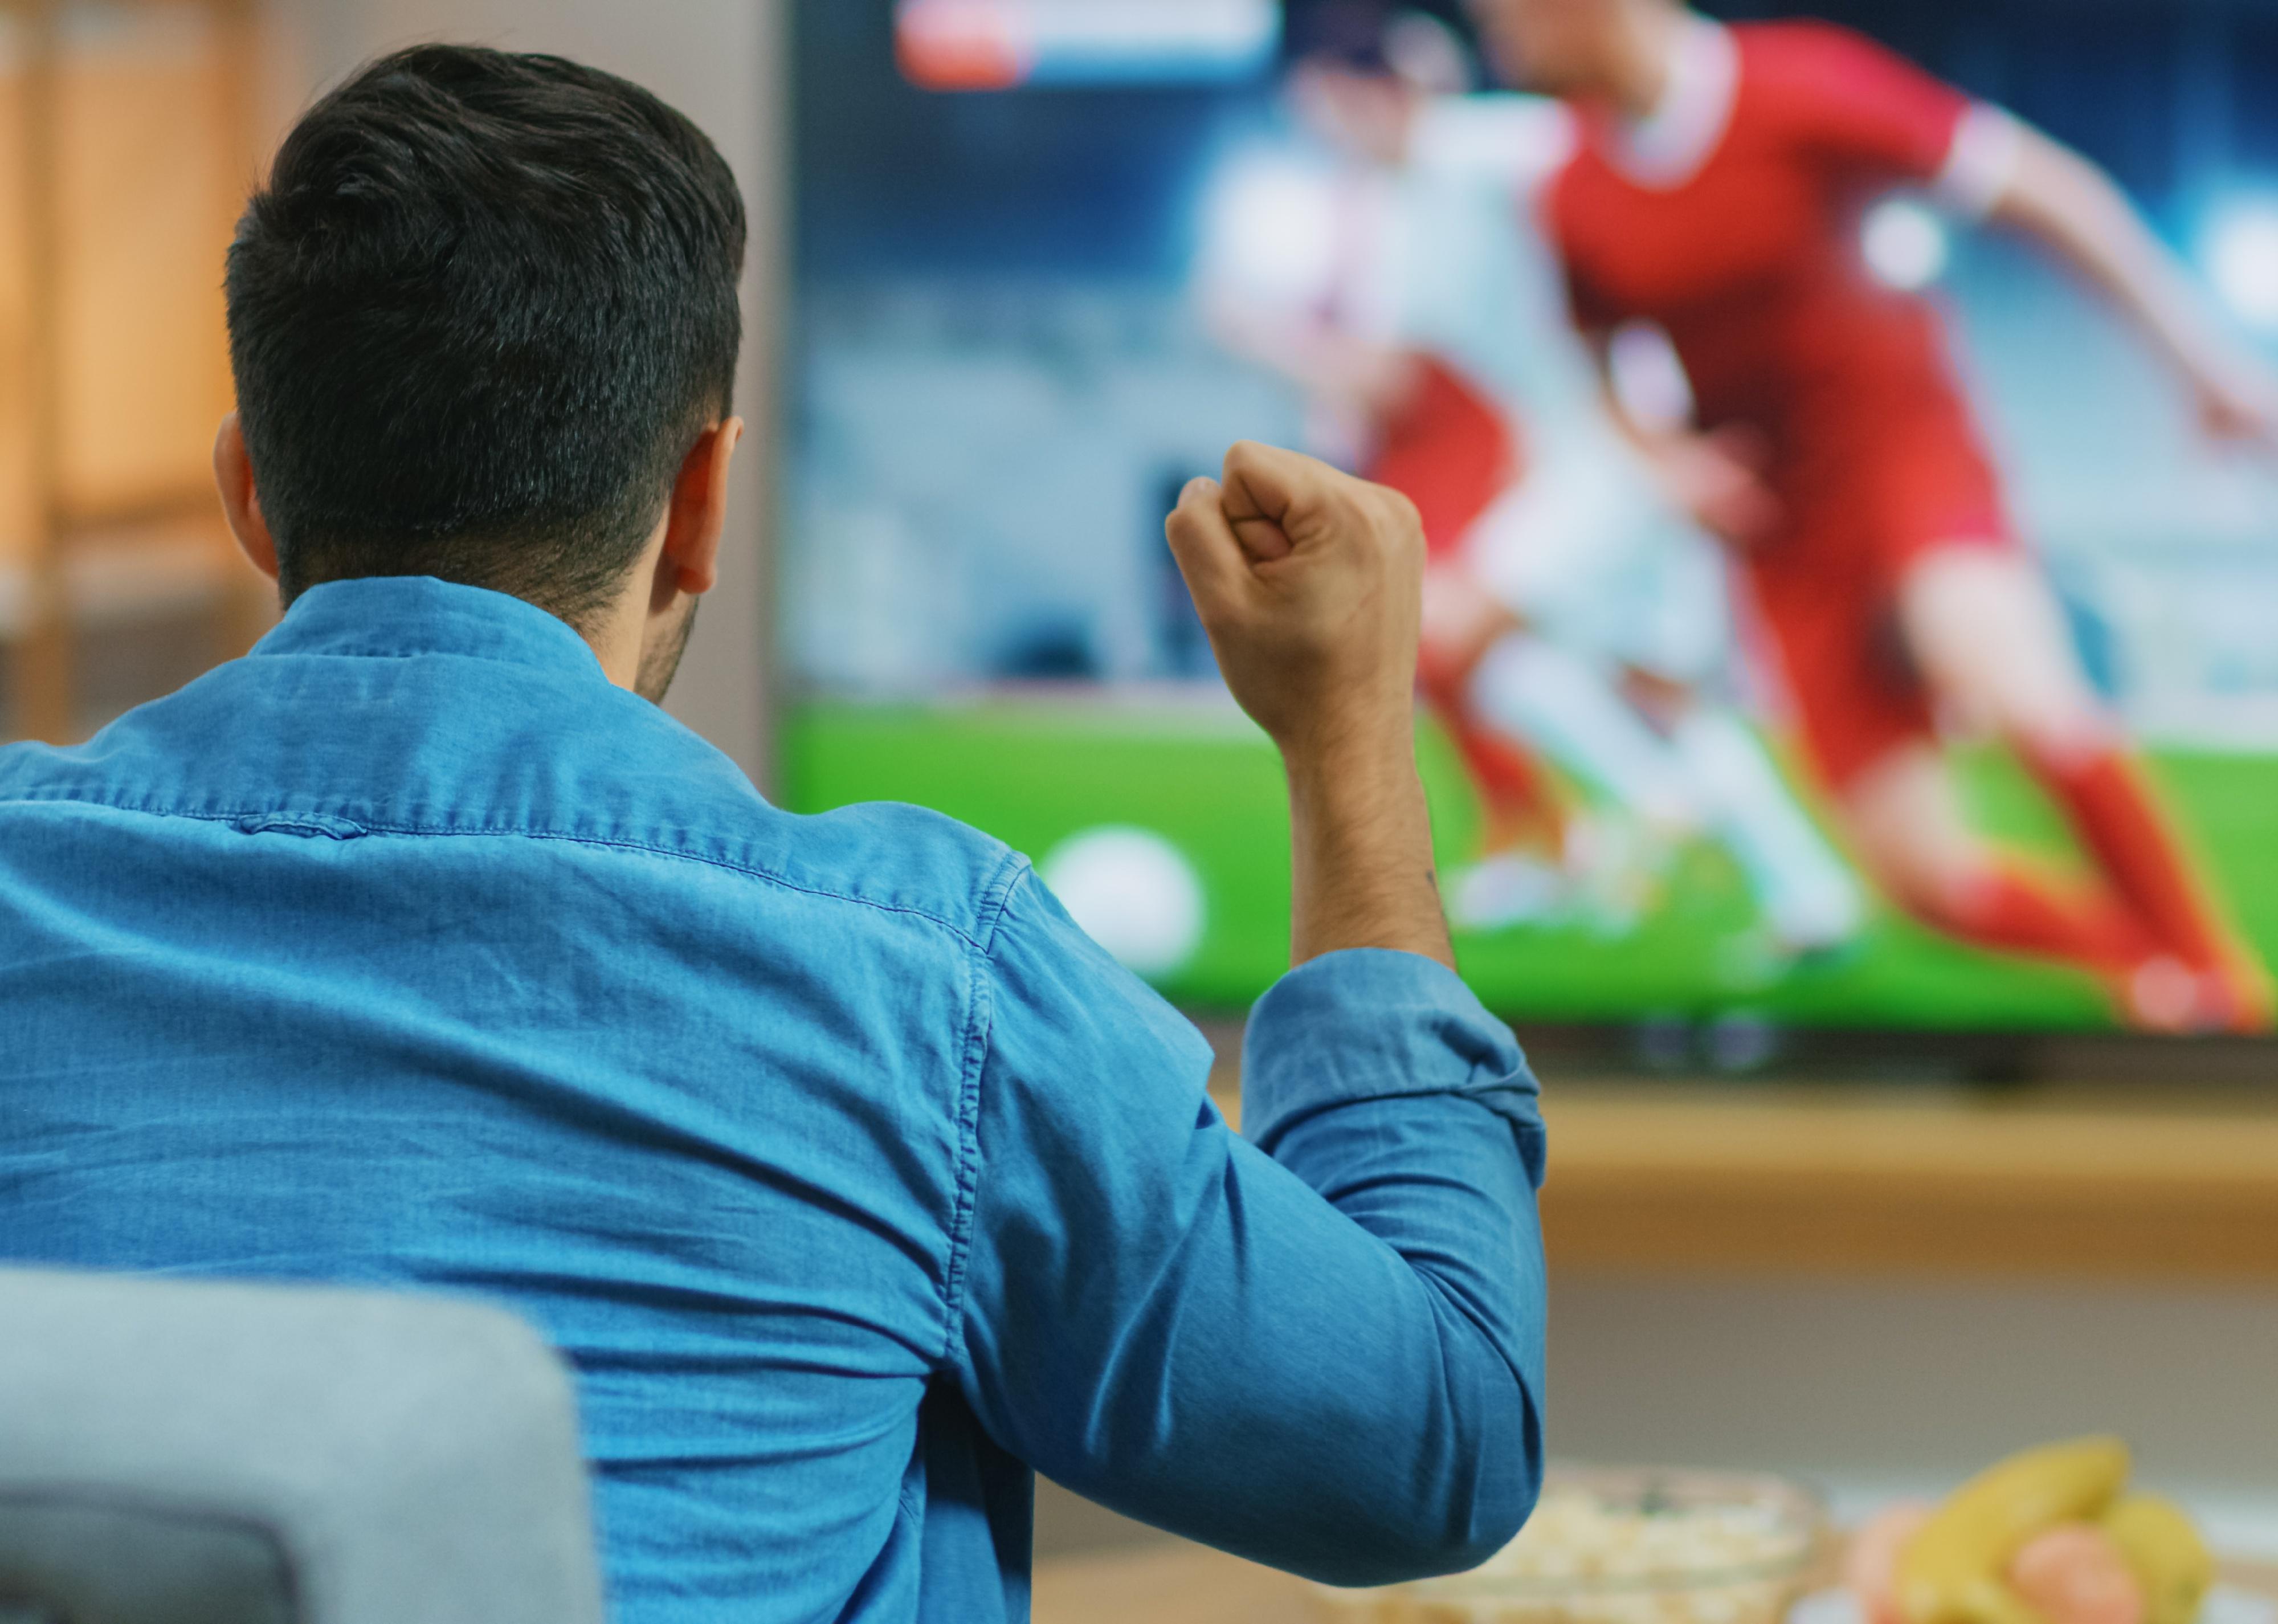 Man watches soccer match on TV.